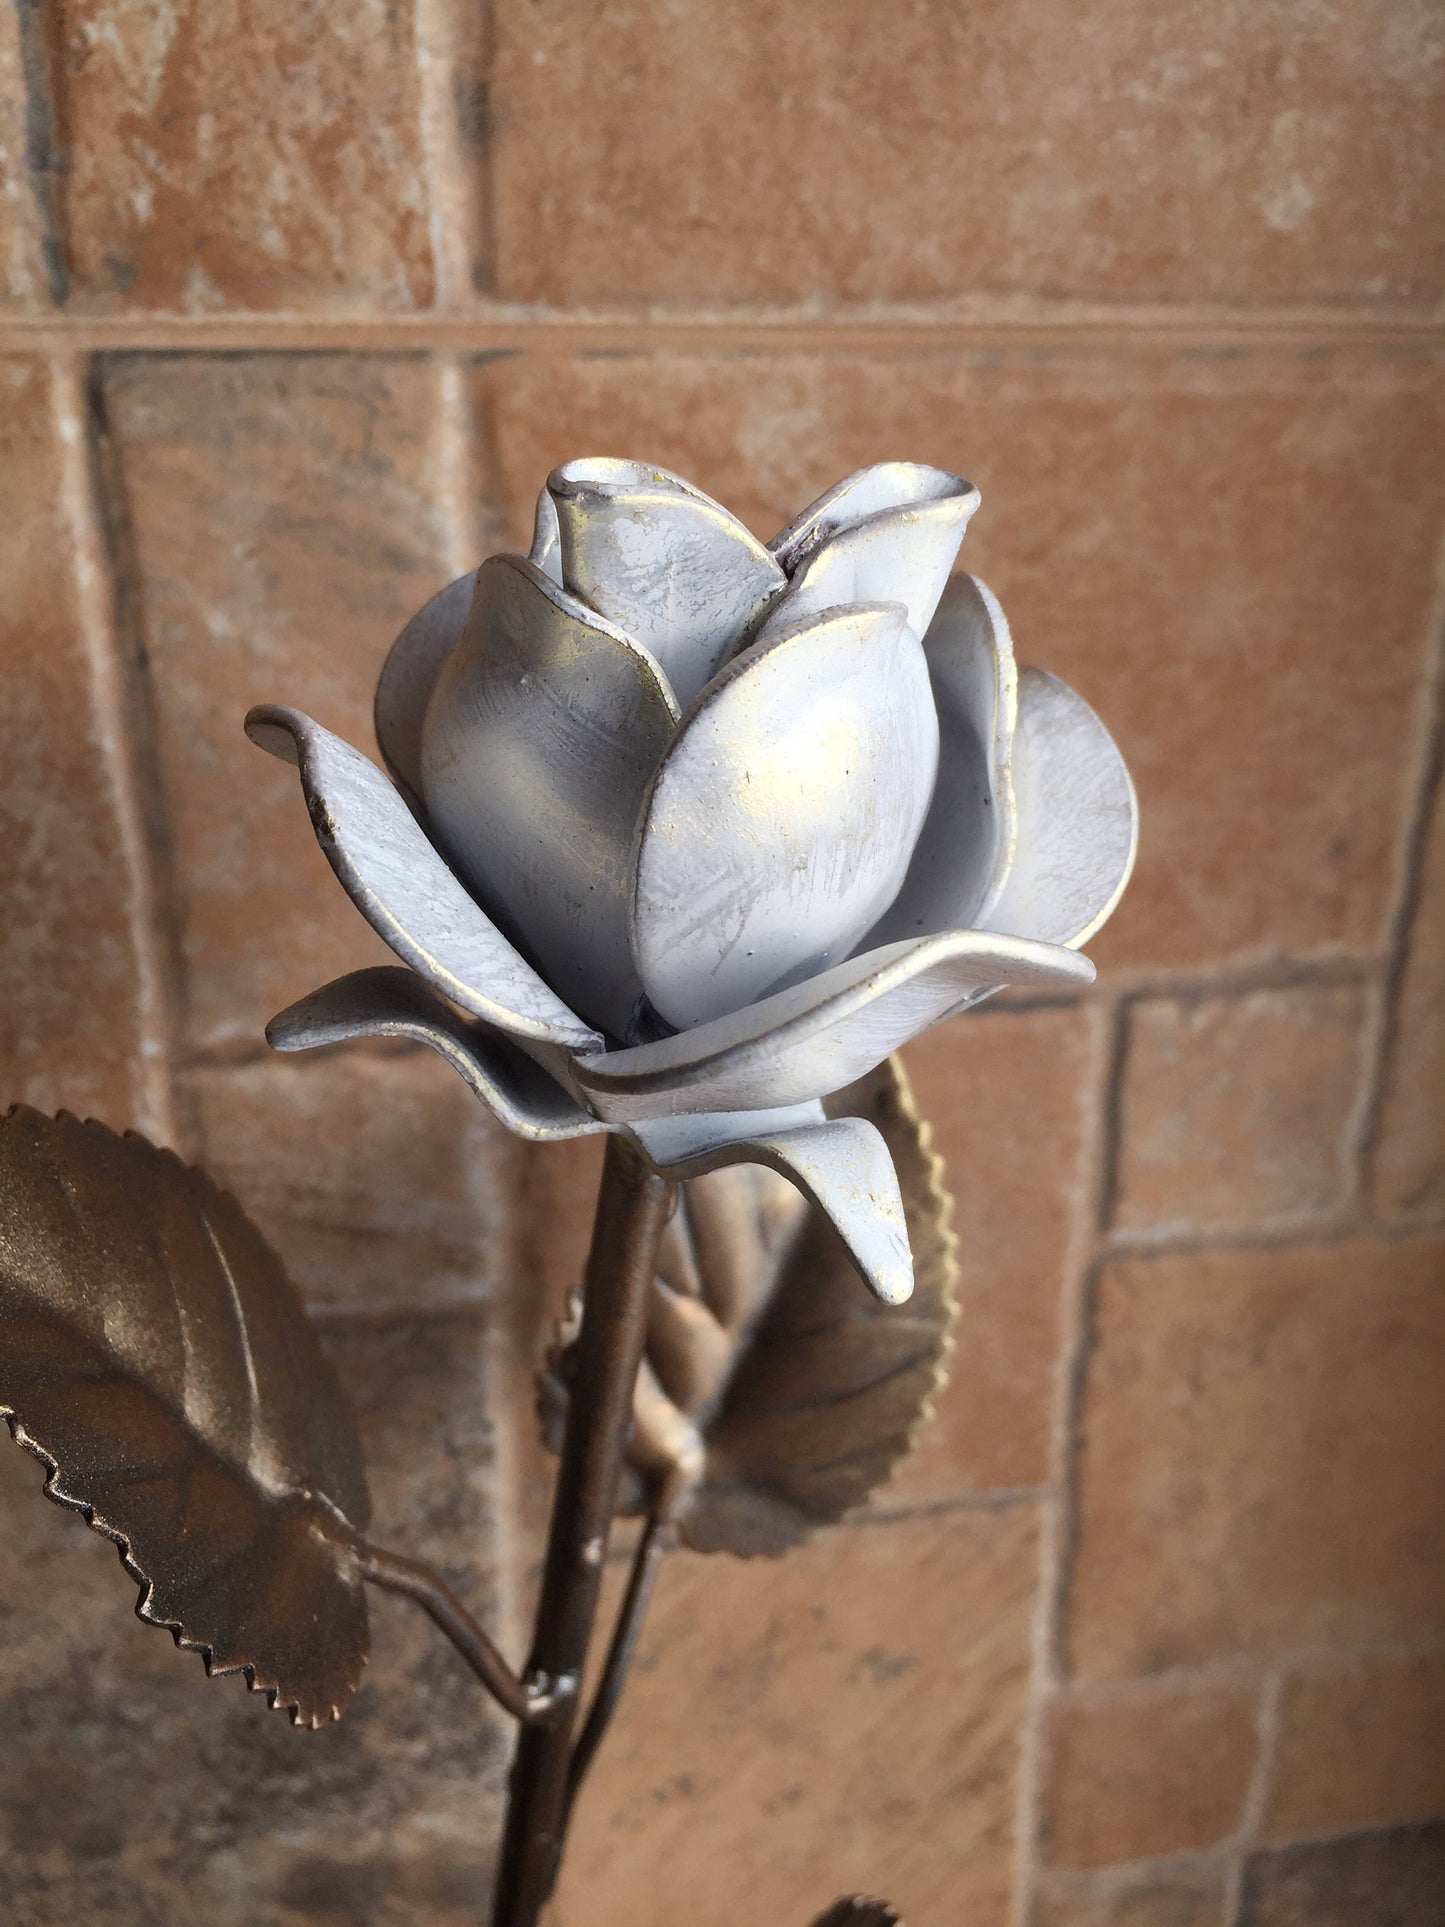 Iron anniversary, iron rose, 6th anniversary gift, hand forged rose, metal sculpture, metal rose, metal roses,forged rose, iron gift for her